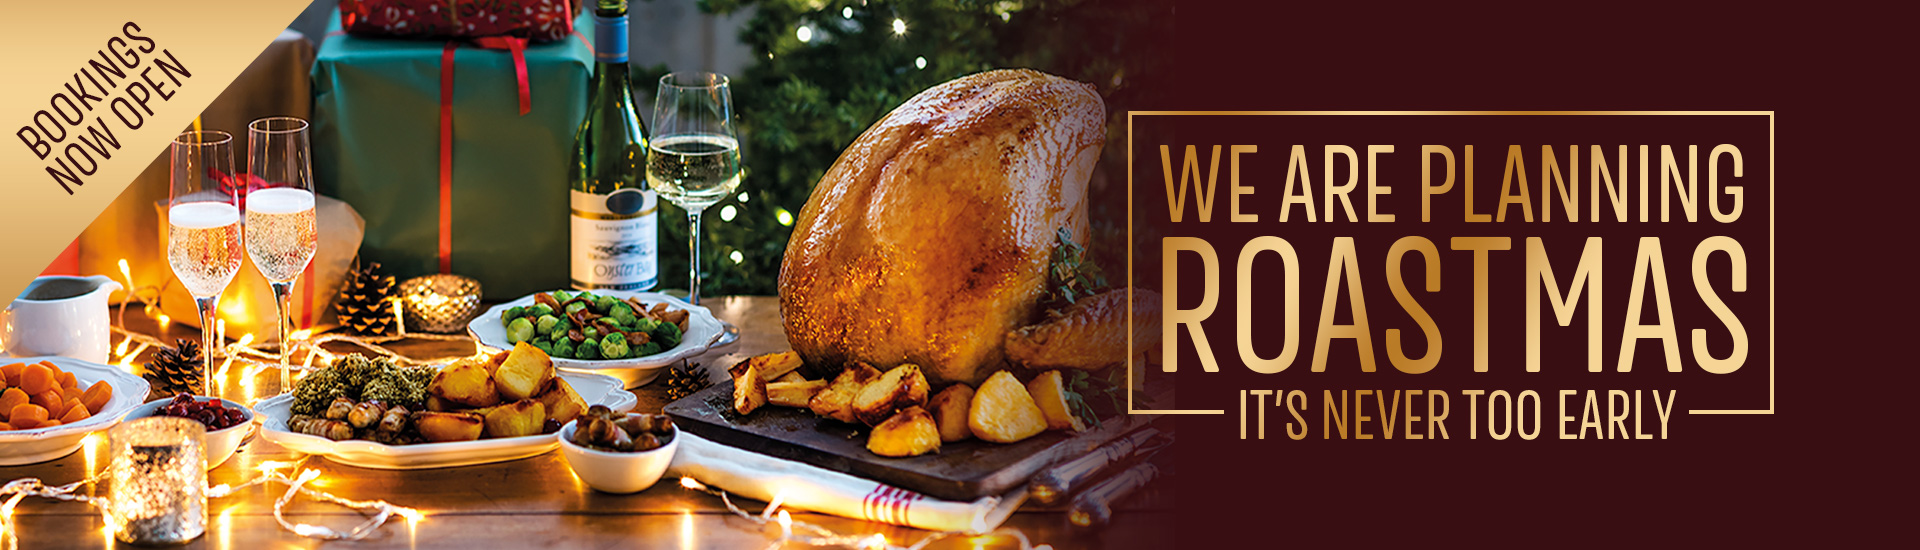 Christmas 2022 at your local Toby Carvery Eden Park | Home of the Roast